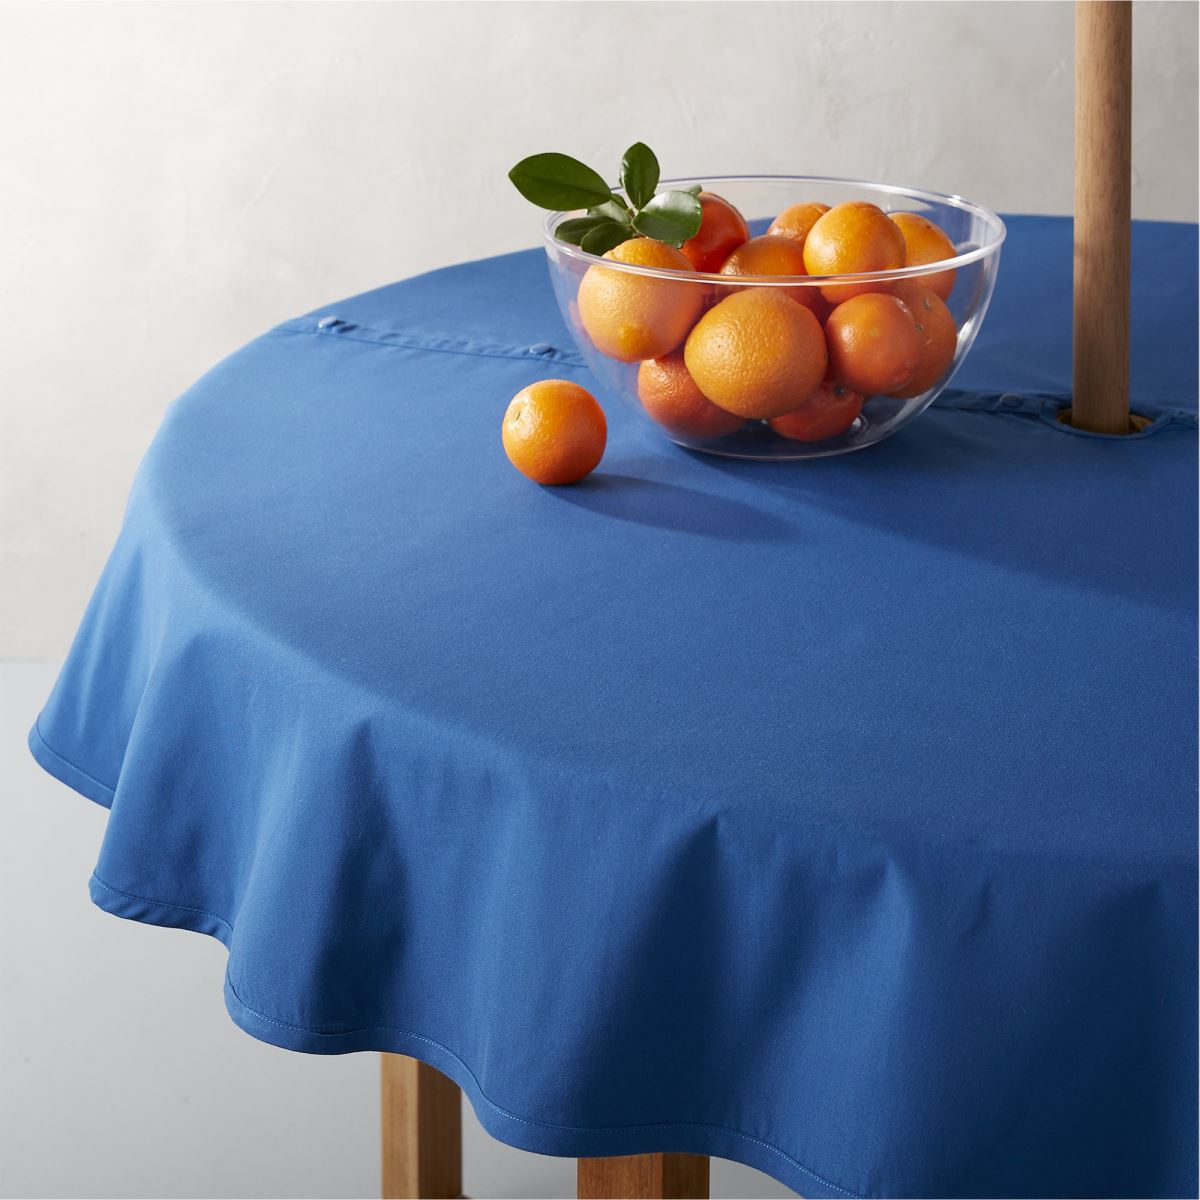 round tablecloths for summer entertaining umbrella tablecloth from crate barrel accent table cloths view gallery decorative pieces pier stools black side tables living room